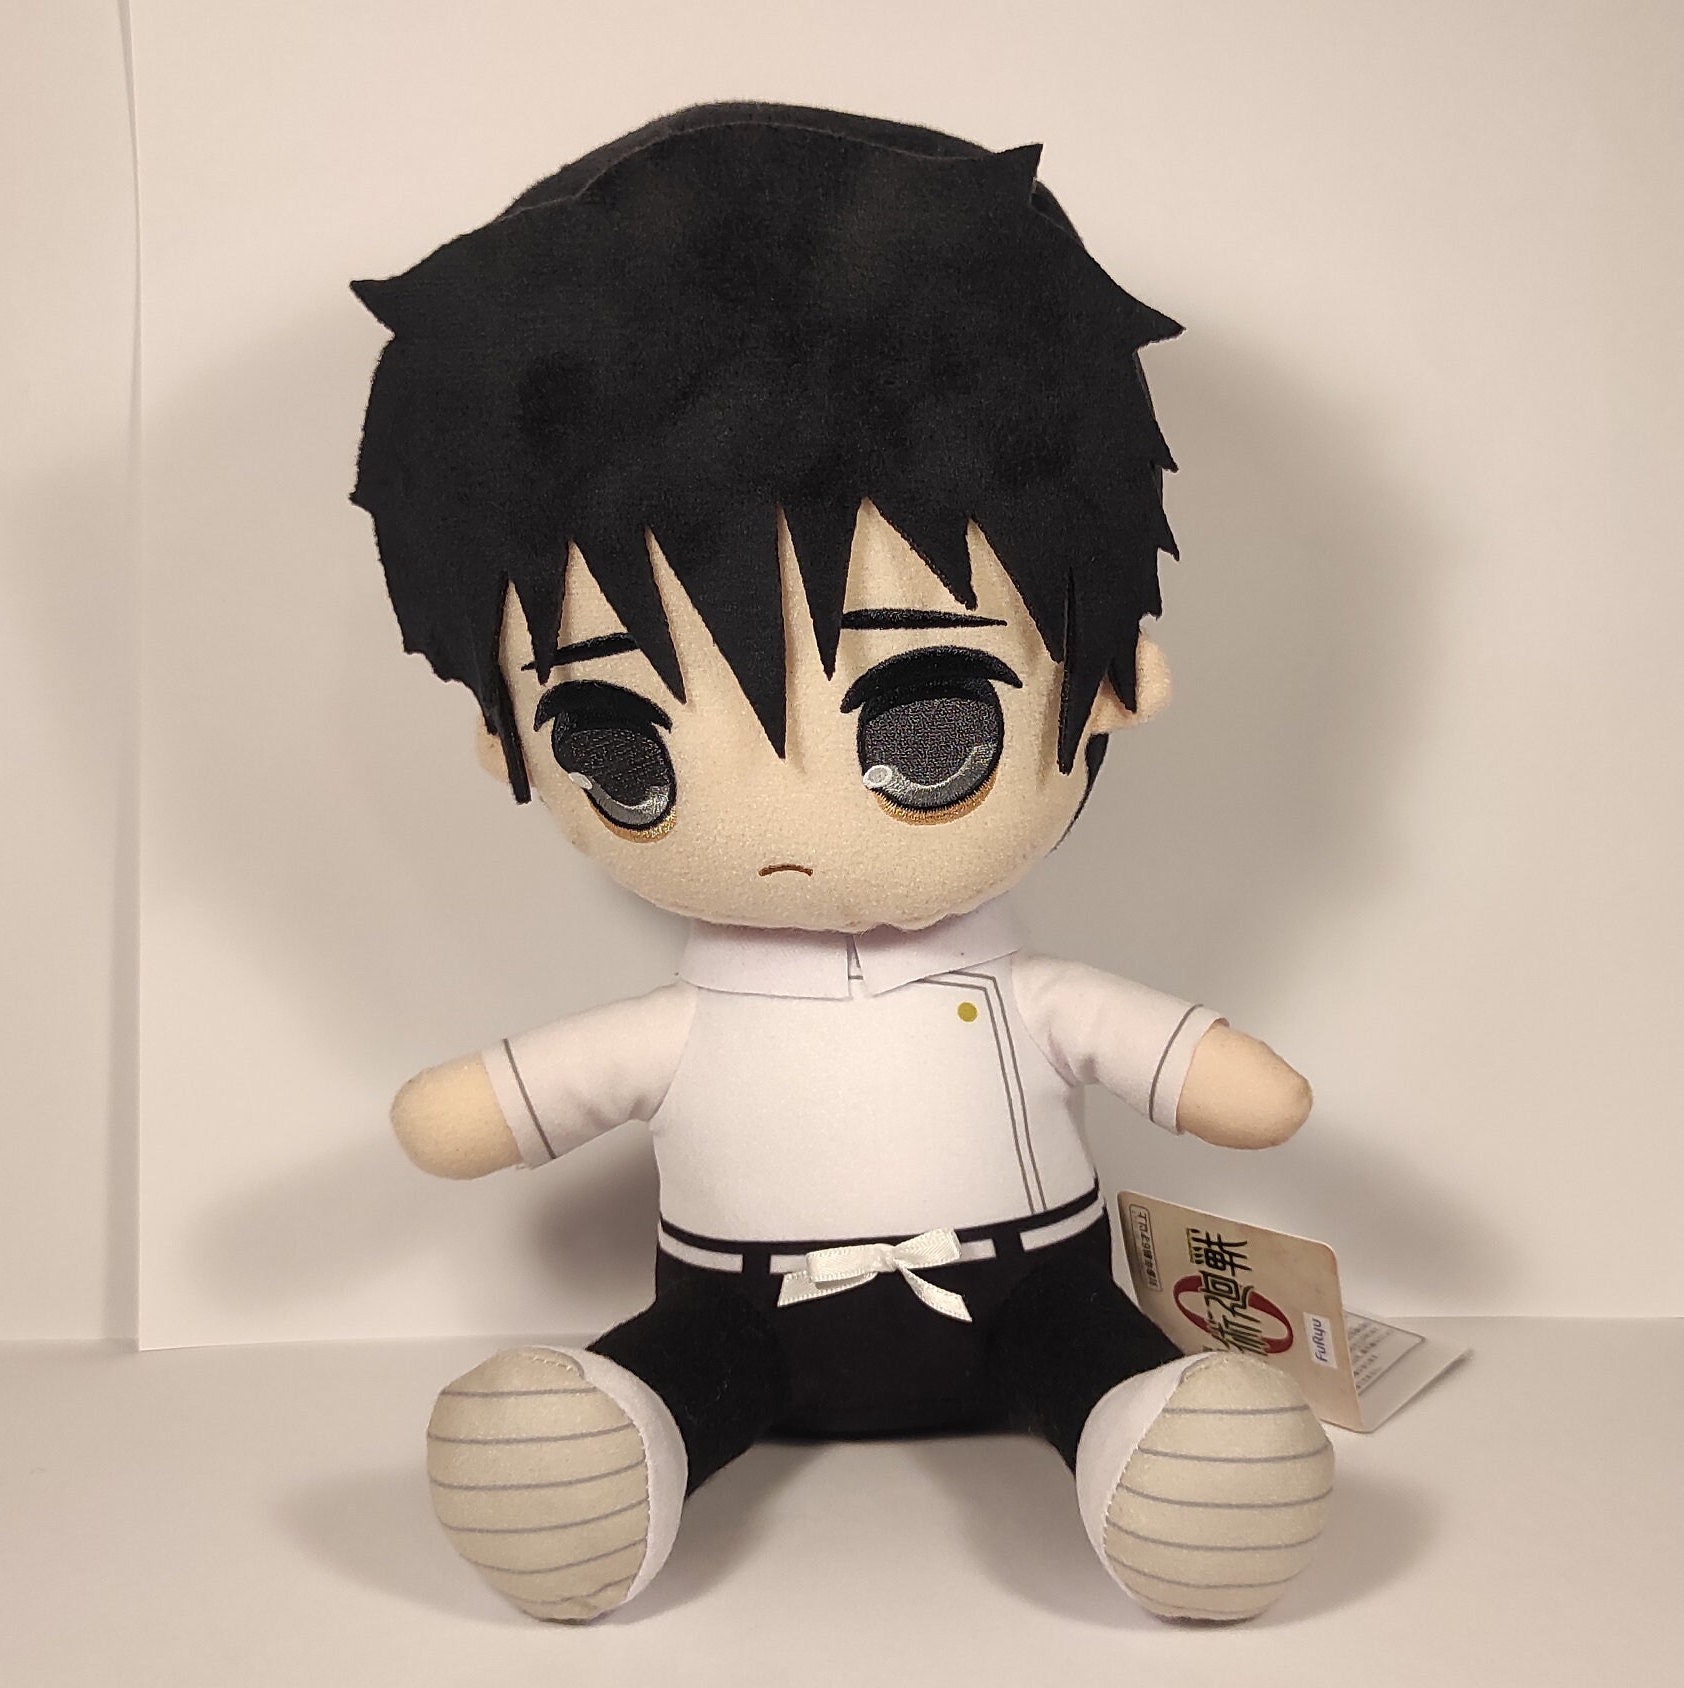 attempt 1 at learning how to make anime plushies bc I cant find any   anime  plushies  TikTok